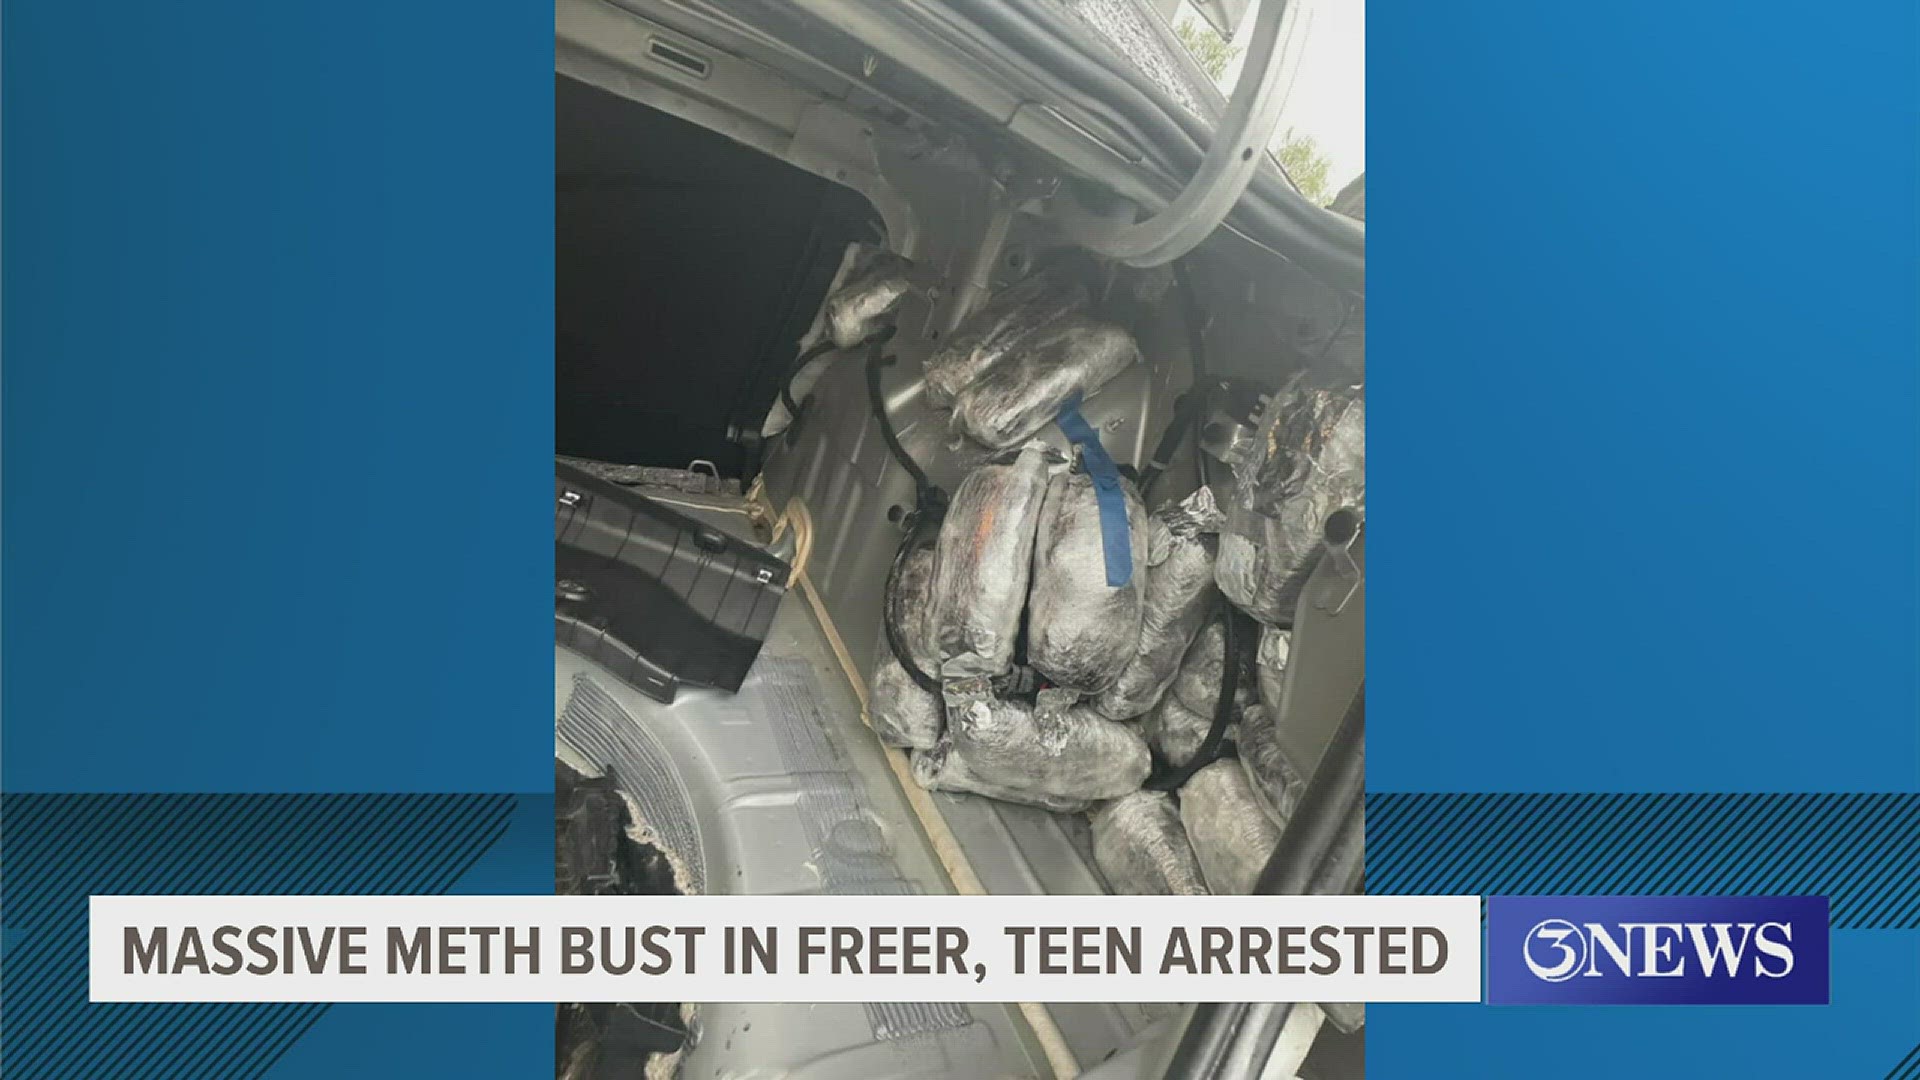 The truck concealed 103 bundles of crystal meth that weighed about 111 pounds and had a street value of over $3.5 million.